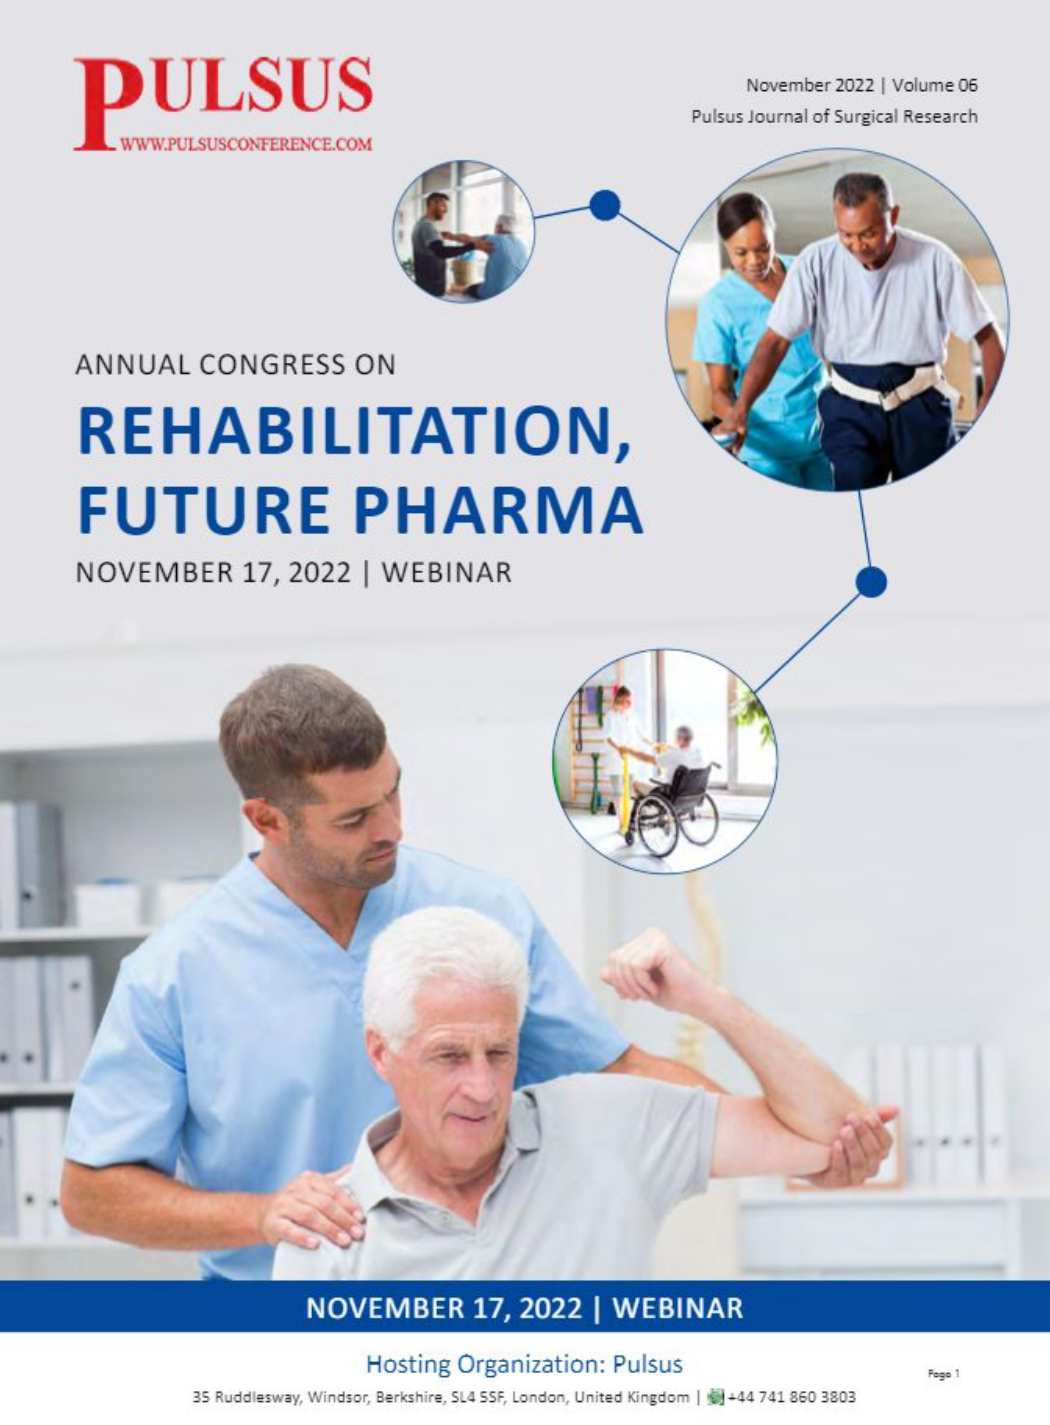 https://www.pulsus.com/conference-abstracts/rehabilitation-2022-proceedings.html